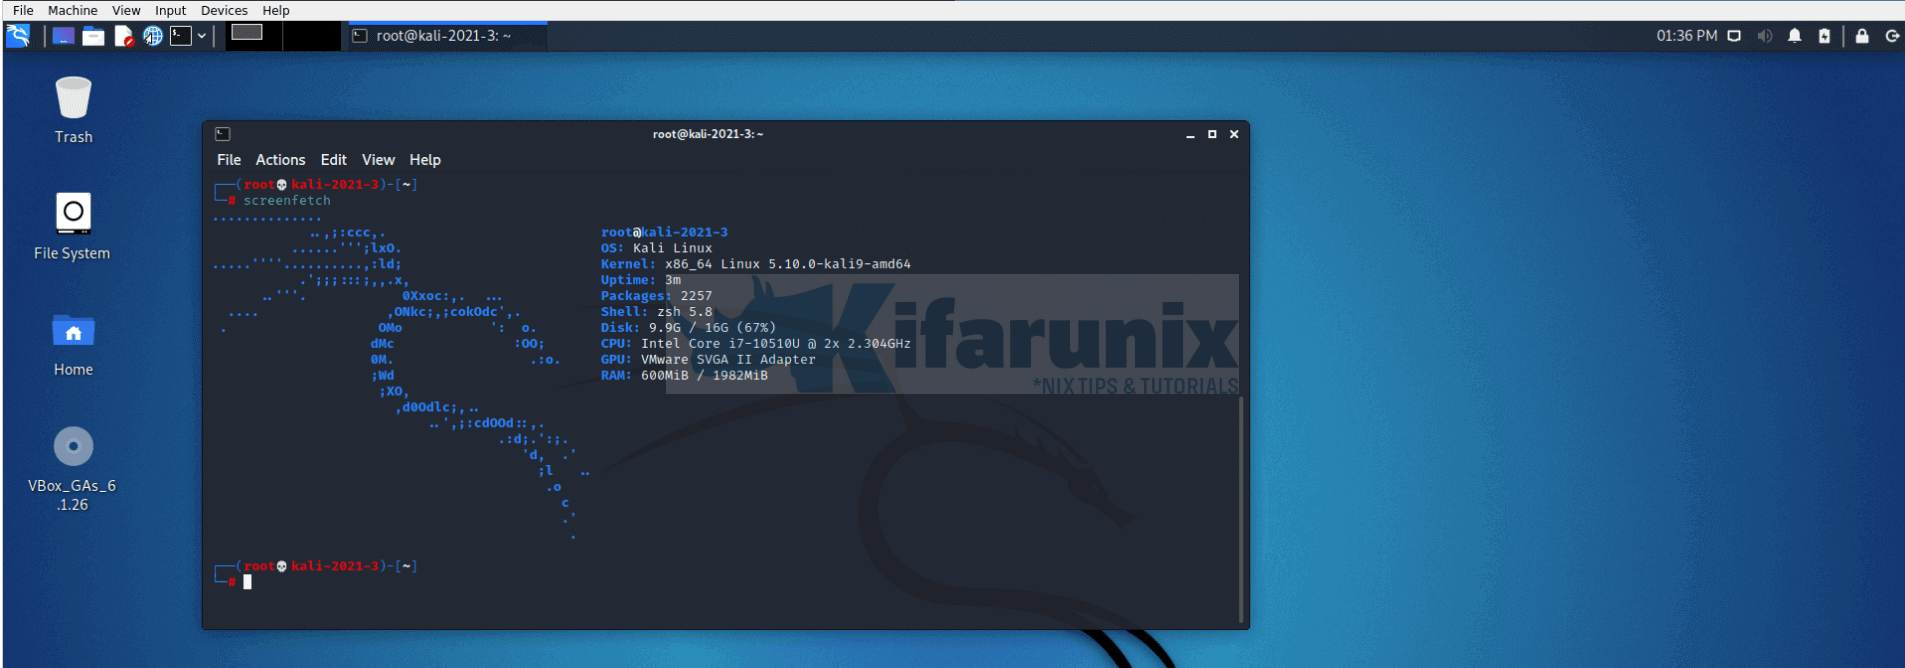 Install VirtualBox Guest Additions on Kali Linux 2021.3